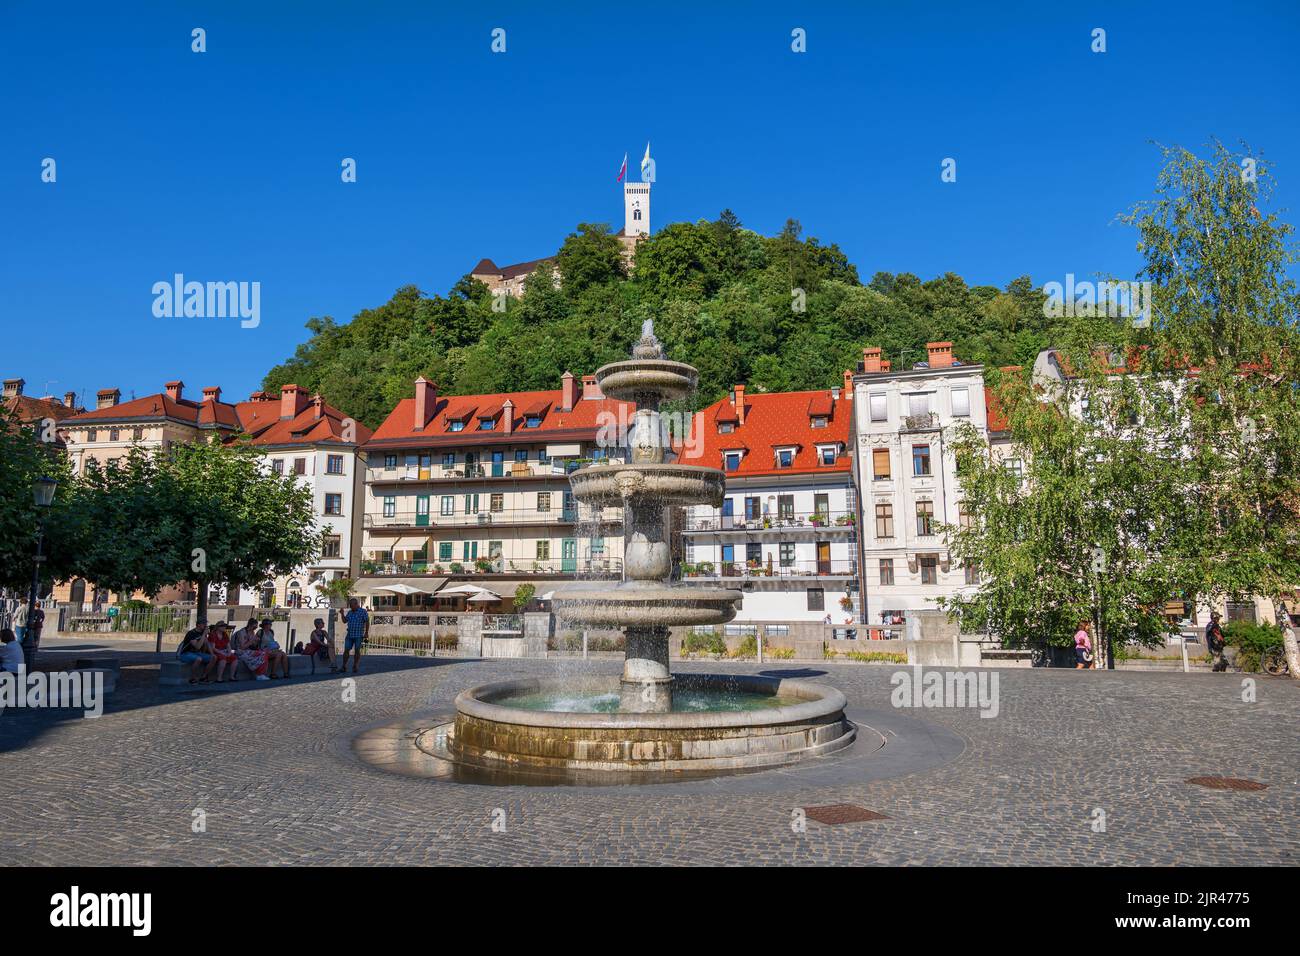 Ljubljana, Slovenia - July 13, 2022: New Square (Novi Trg) with a fountain and view to the Old Town and castle hill in capital city Stock Photo